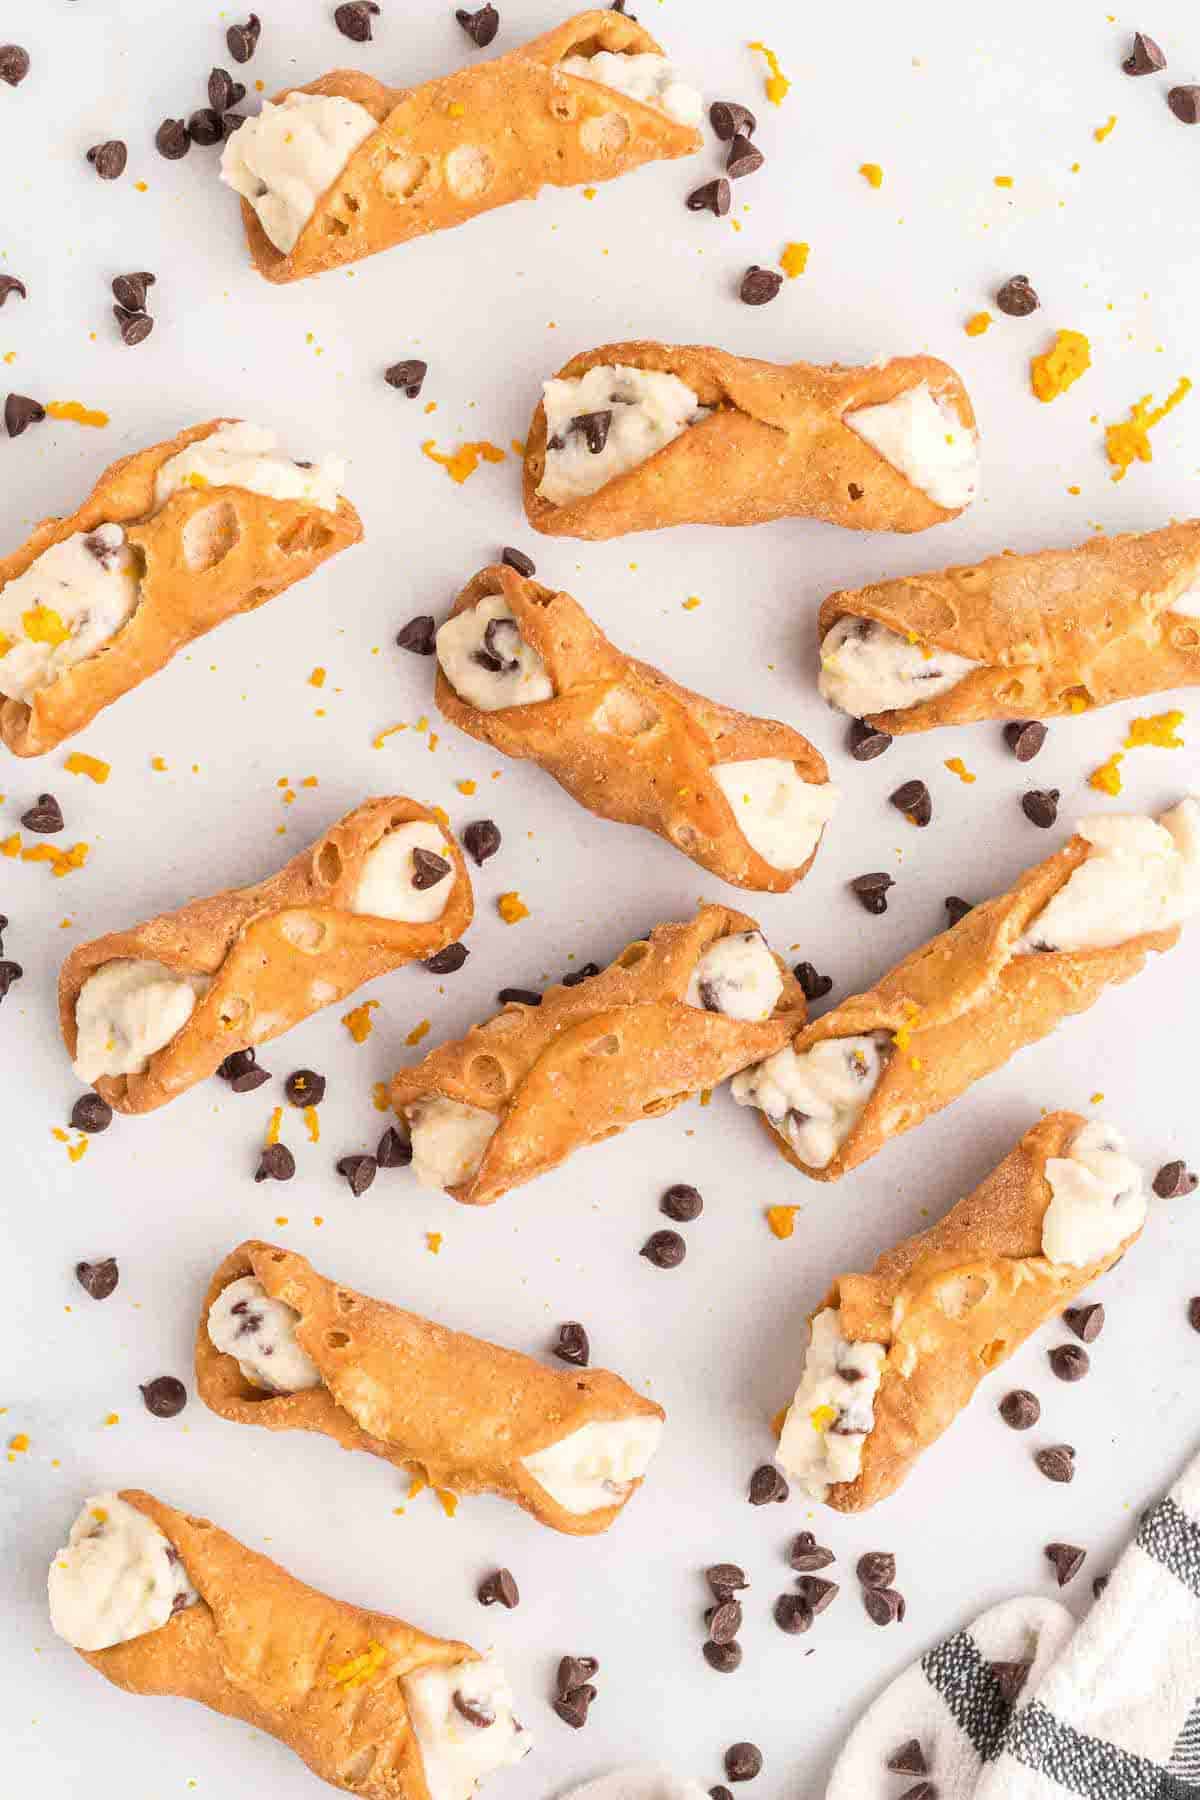 freshly filled cannoli shells with the cannoli filling recipe. Chocolate chips are scattered around the cannolis.